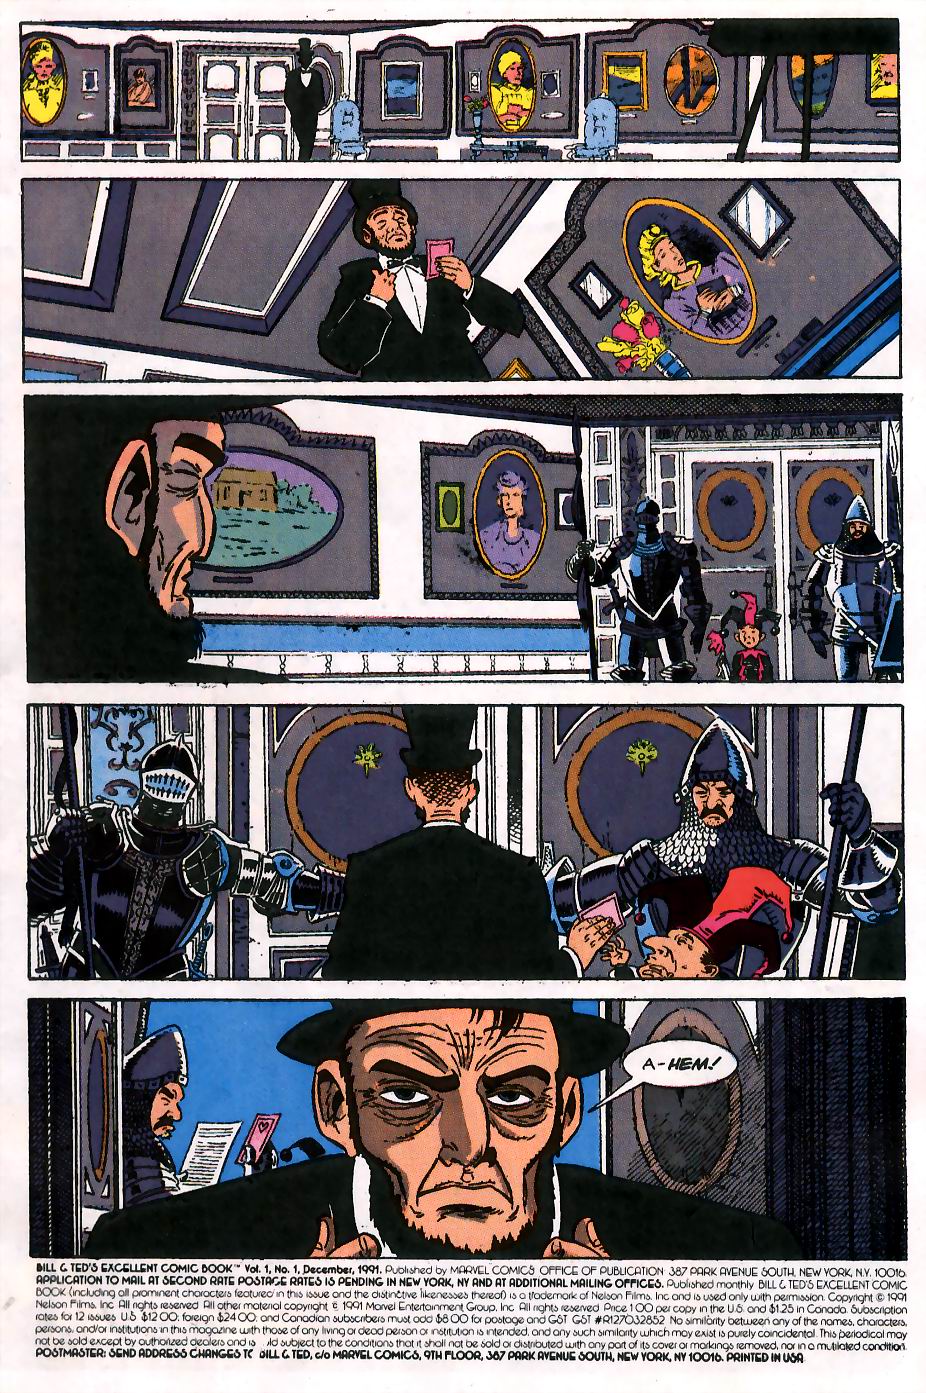 Bill & Teds Excellent Comic Book 1 Page 1